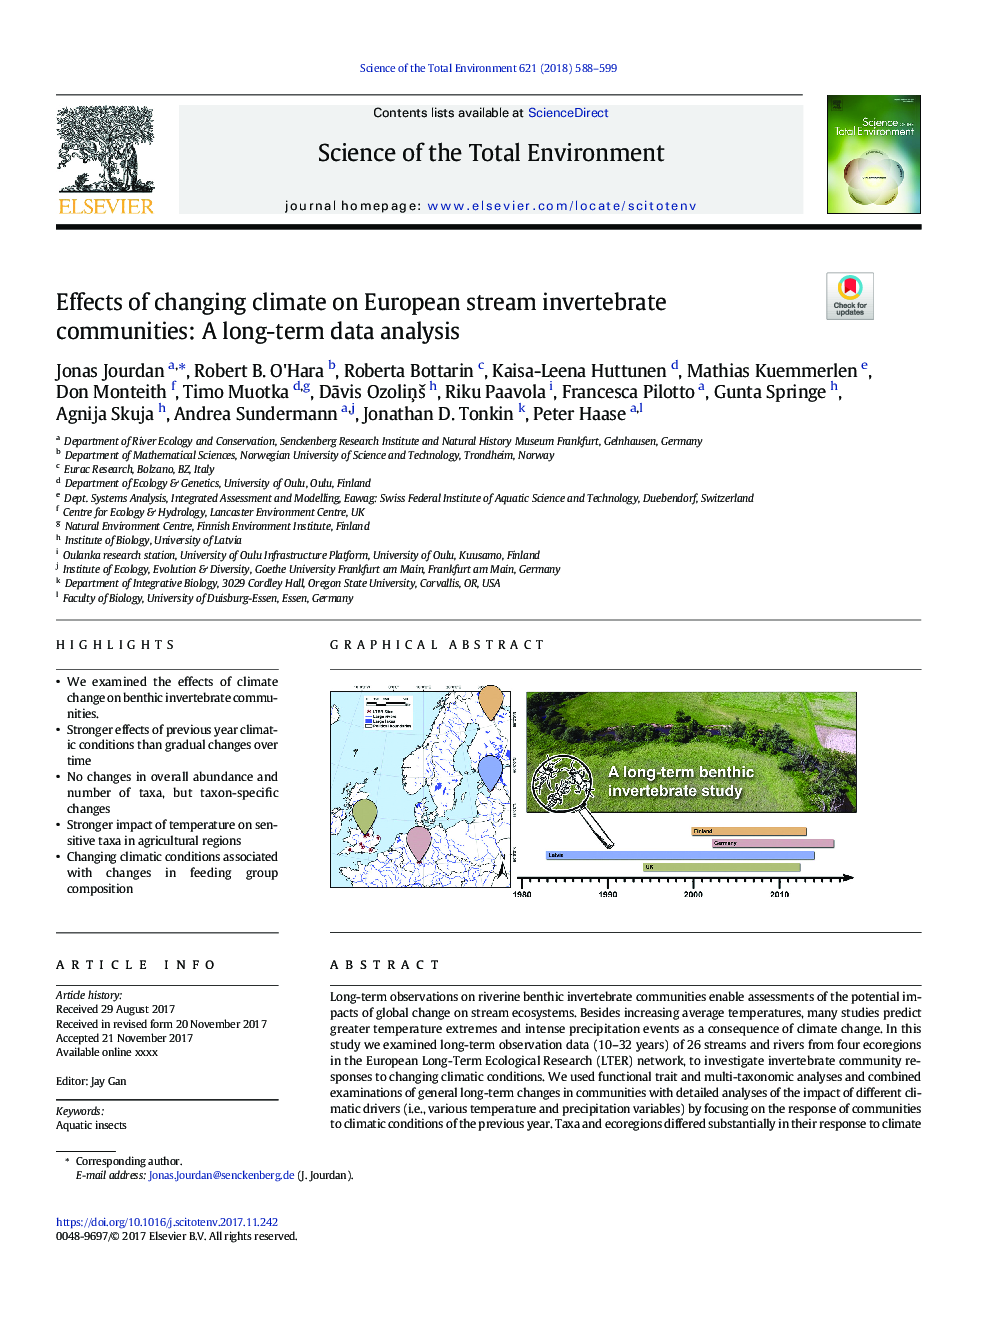 Effects of changing climate on European stream invertebrate communities: A long-term data analysis